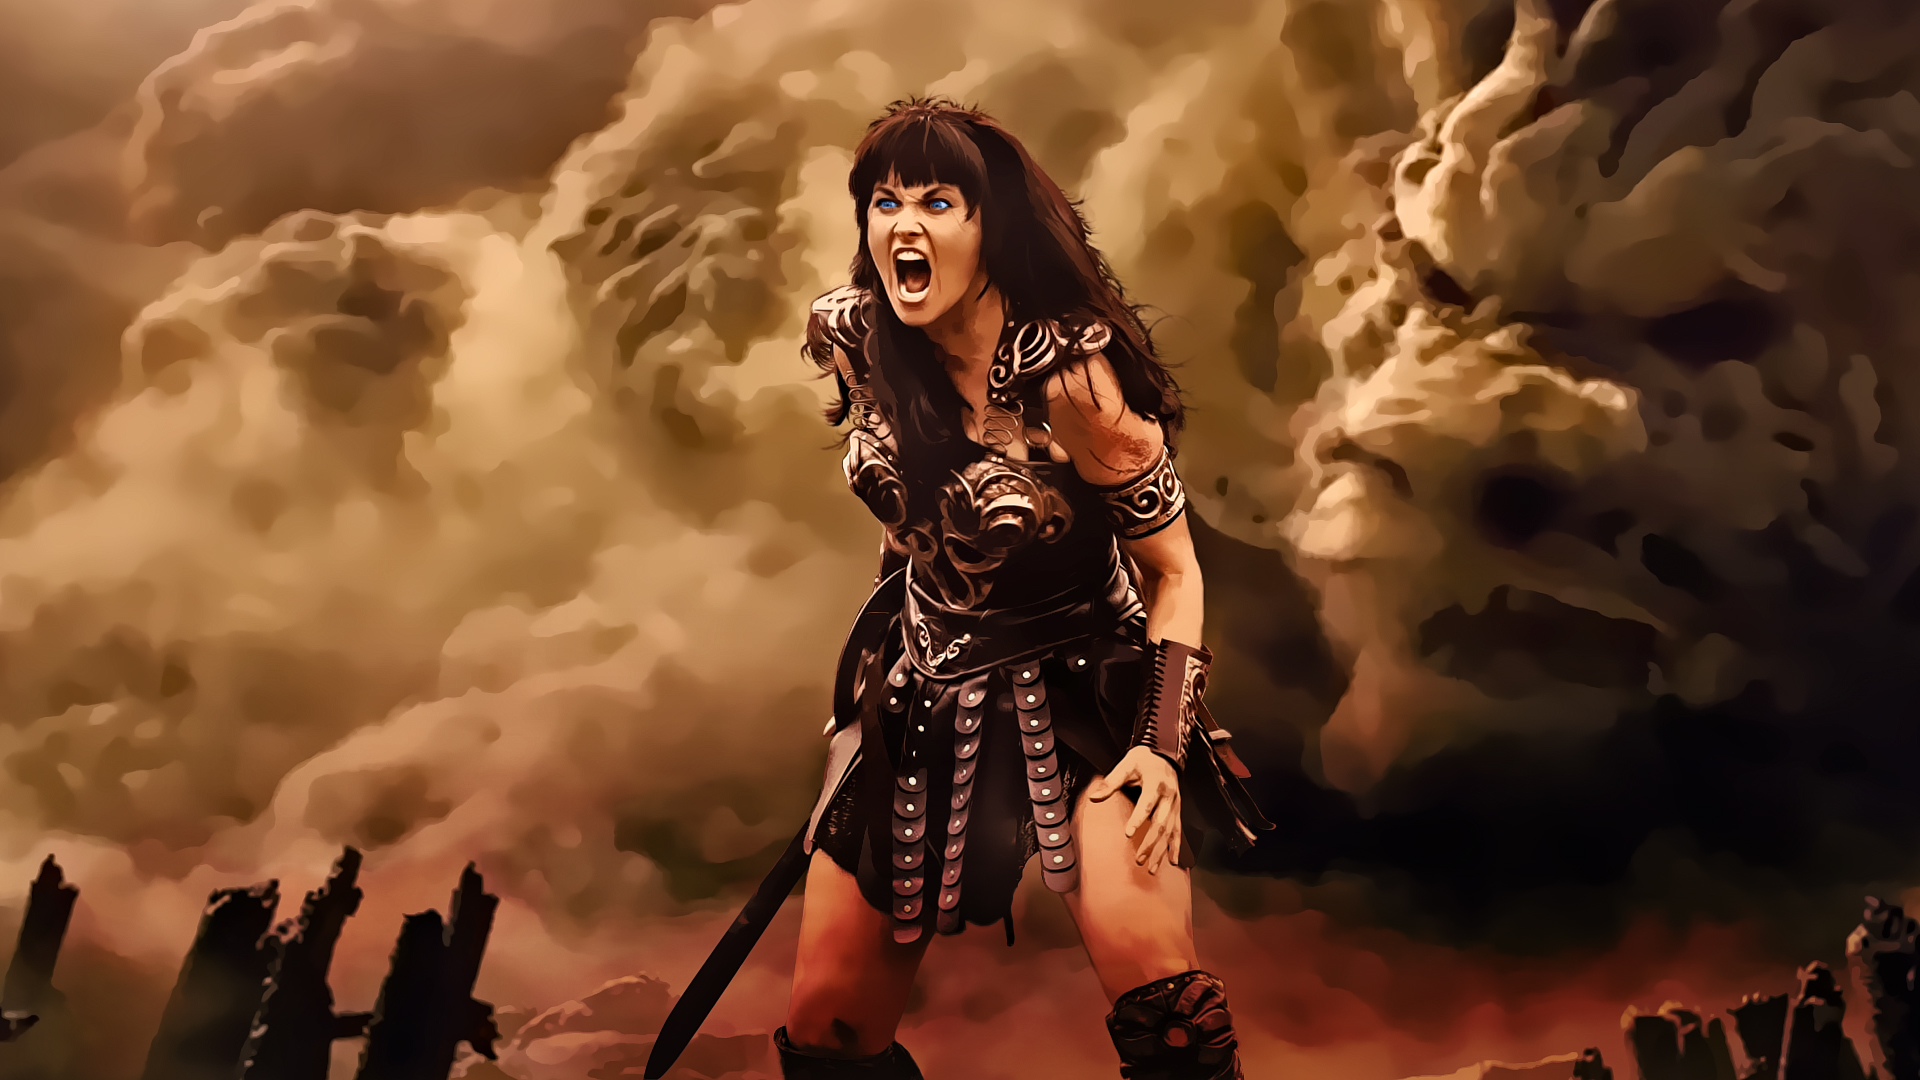 xena (xena: warrior princess), xena: warrior princess, tv show, fantasy, lucy lawless, woman warrior